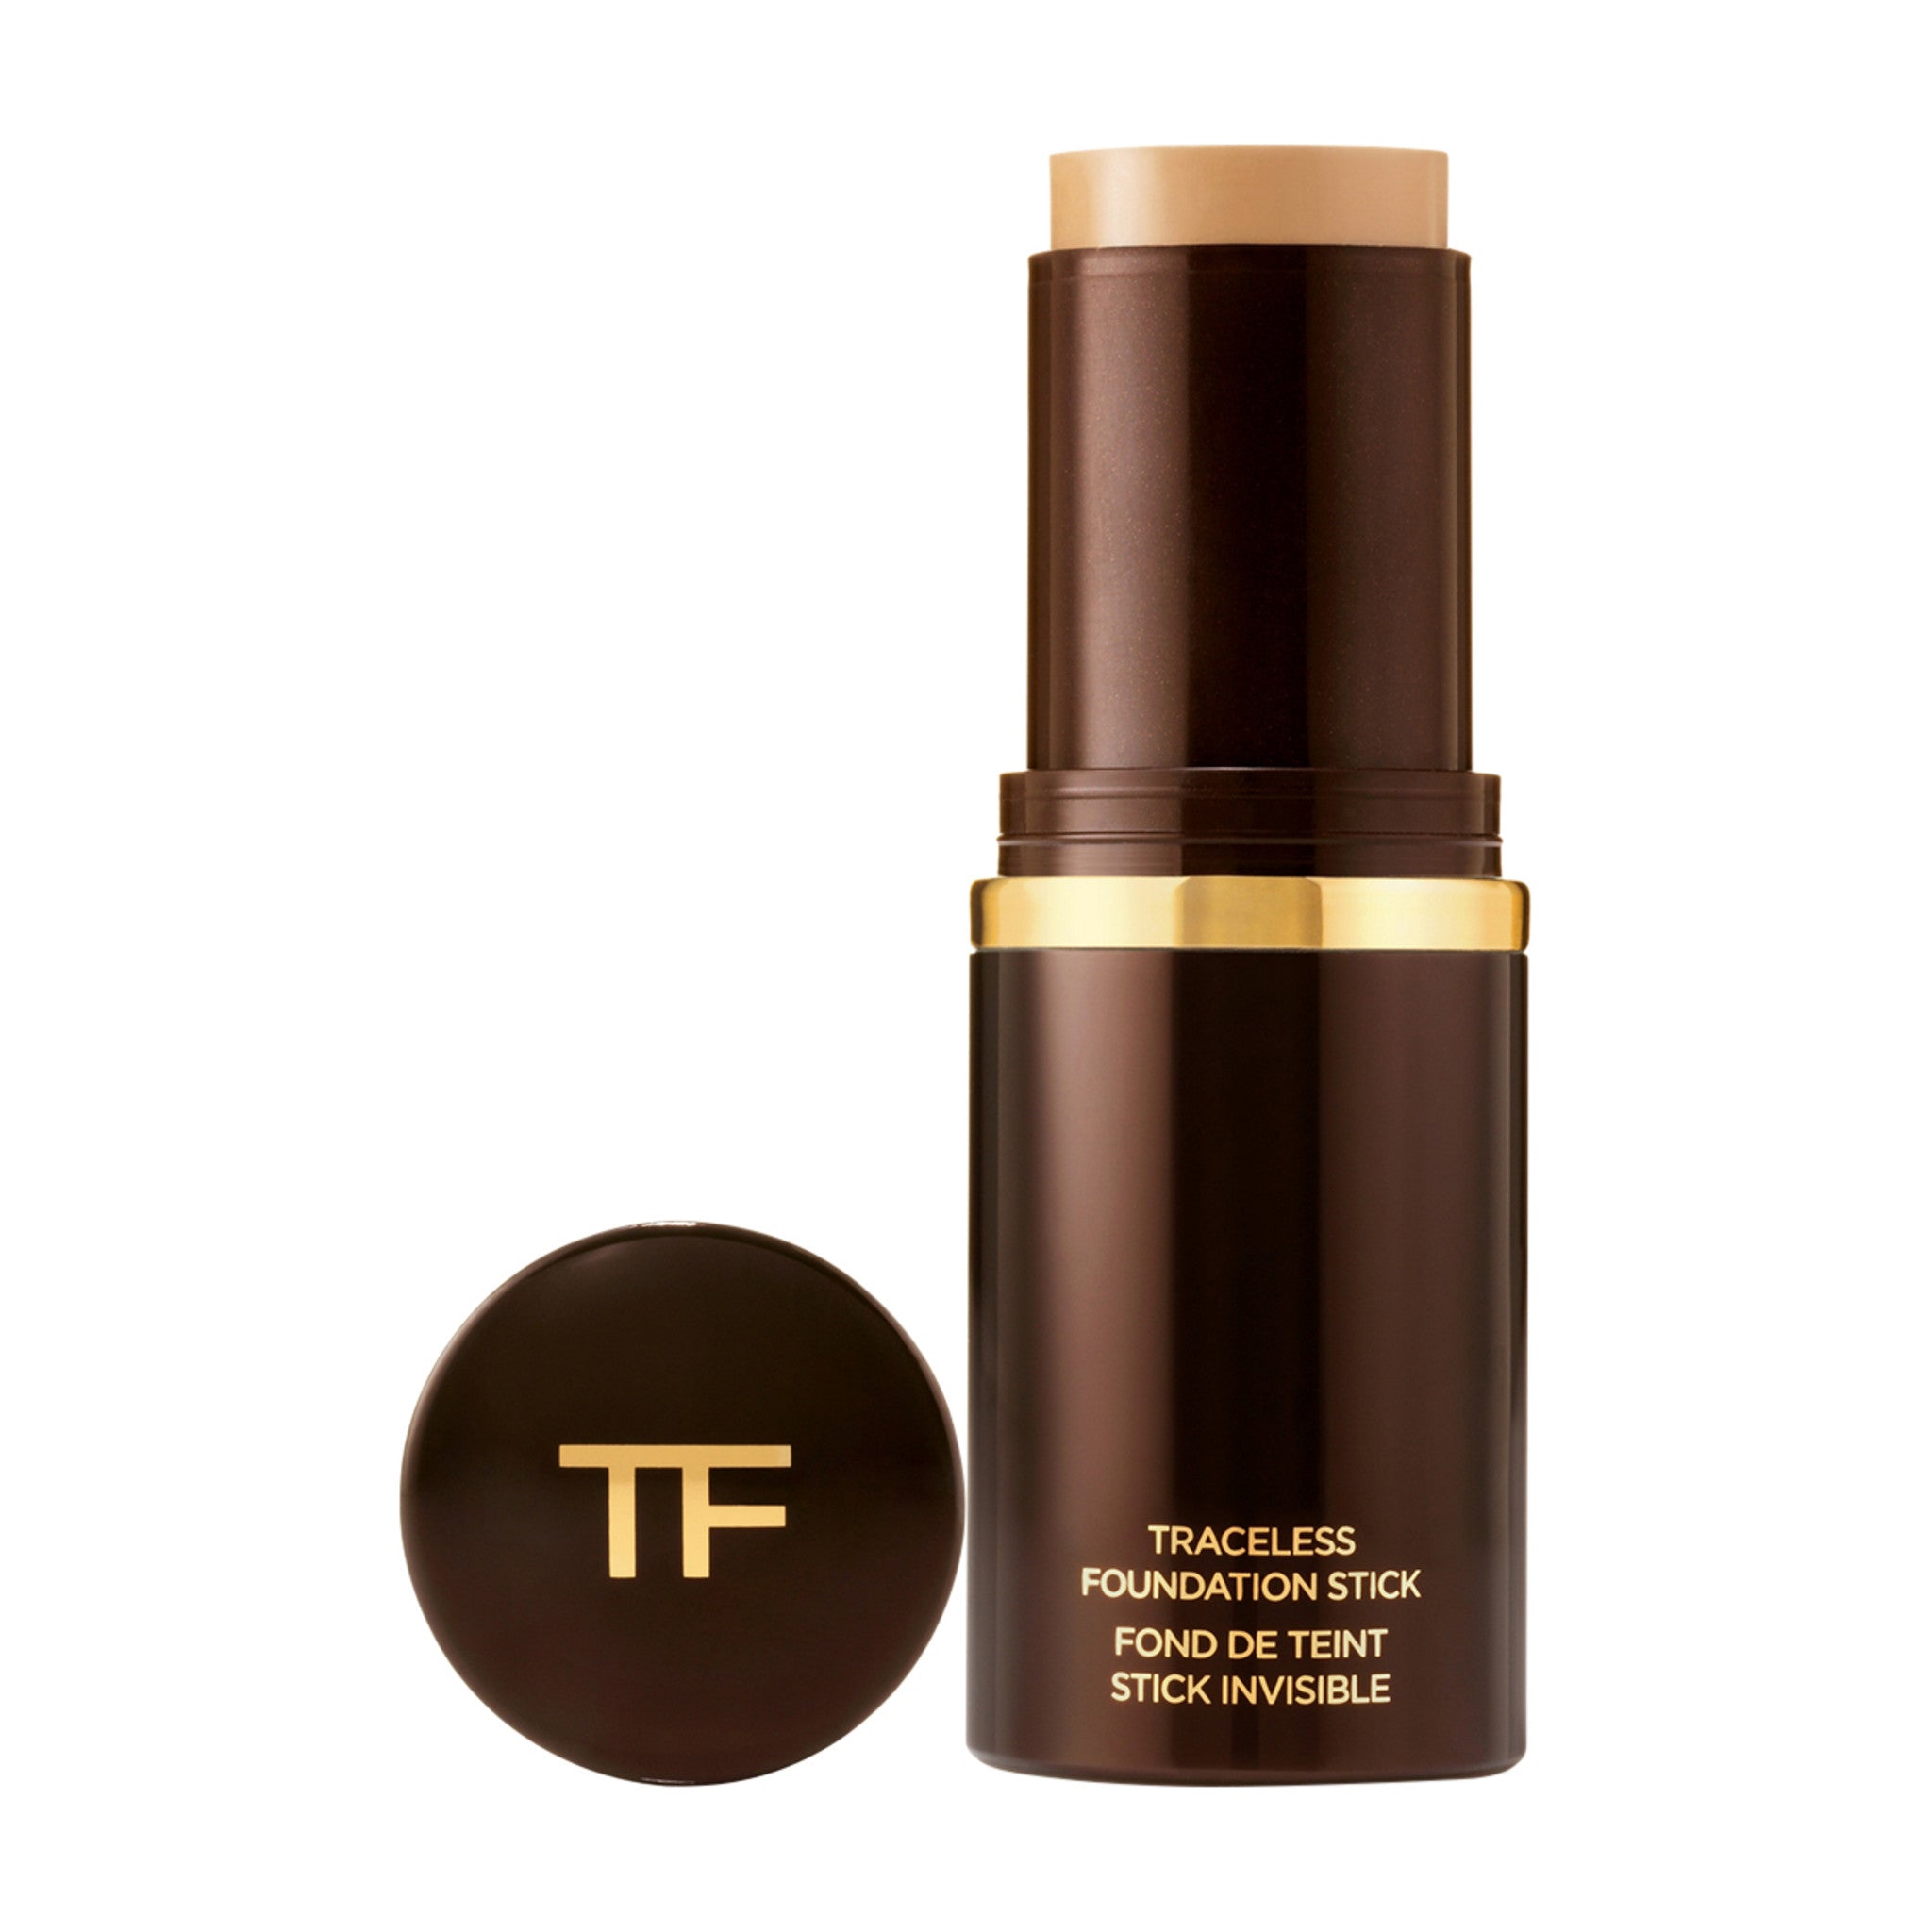 Tom Ford Traceless Foundation Stick Color/Shade variant: 7.7 Honey (Dark, neutral undertone) main image. This product is for deep neutral complexions